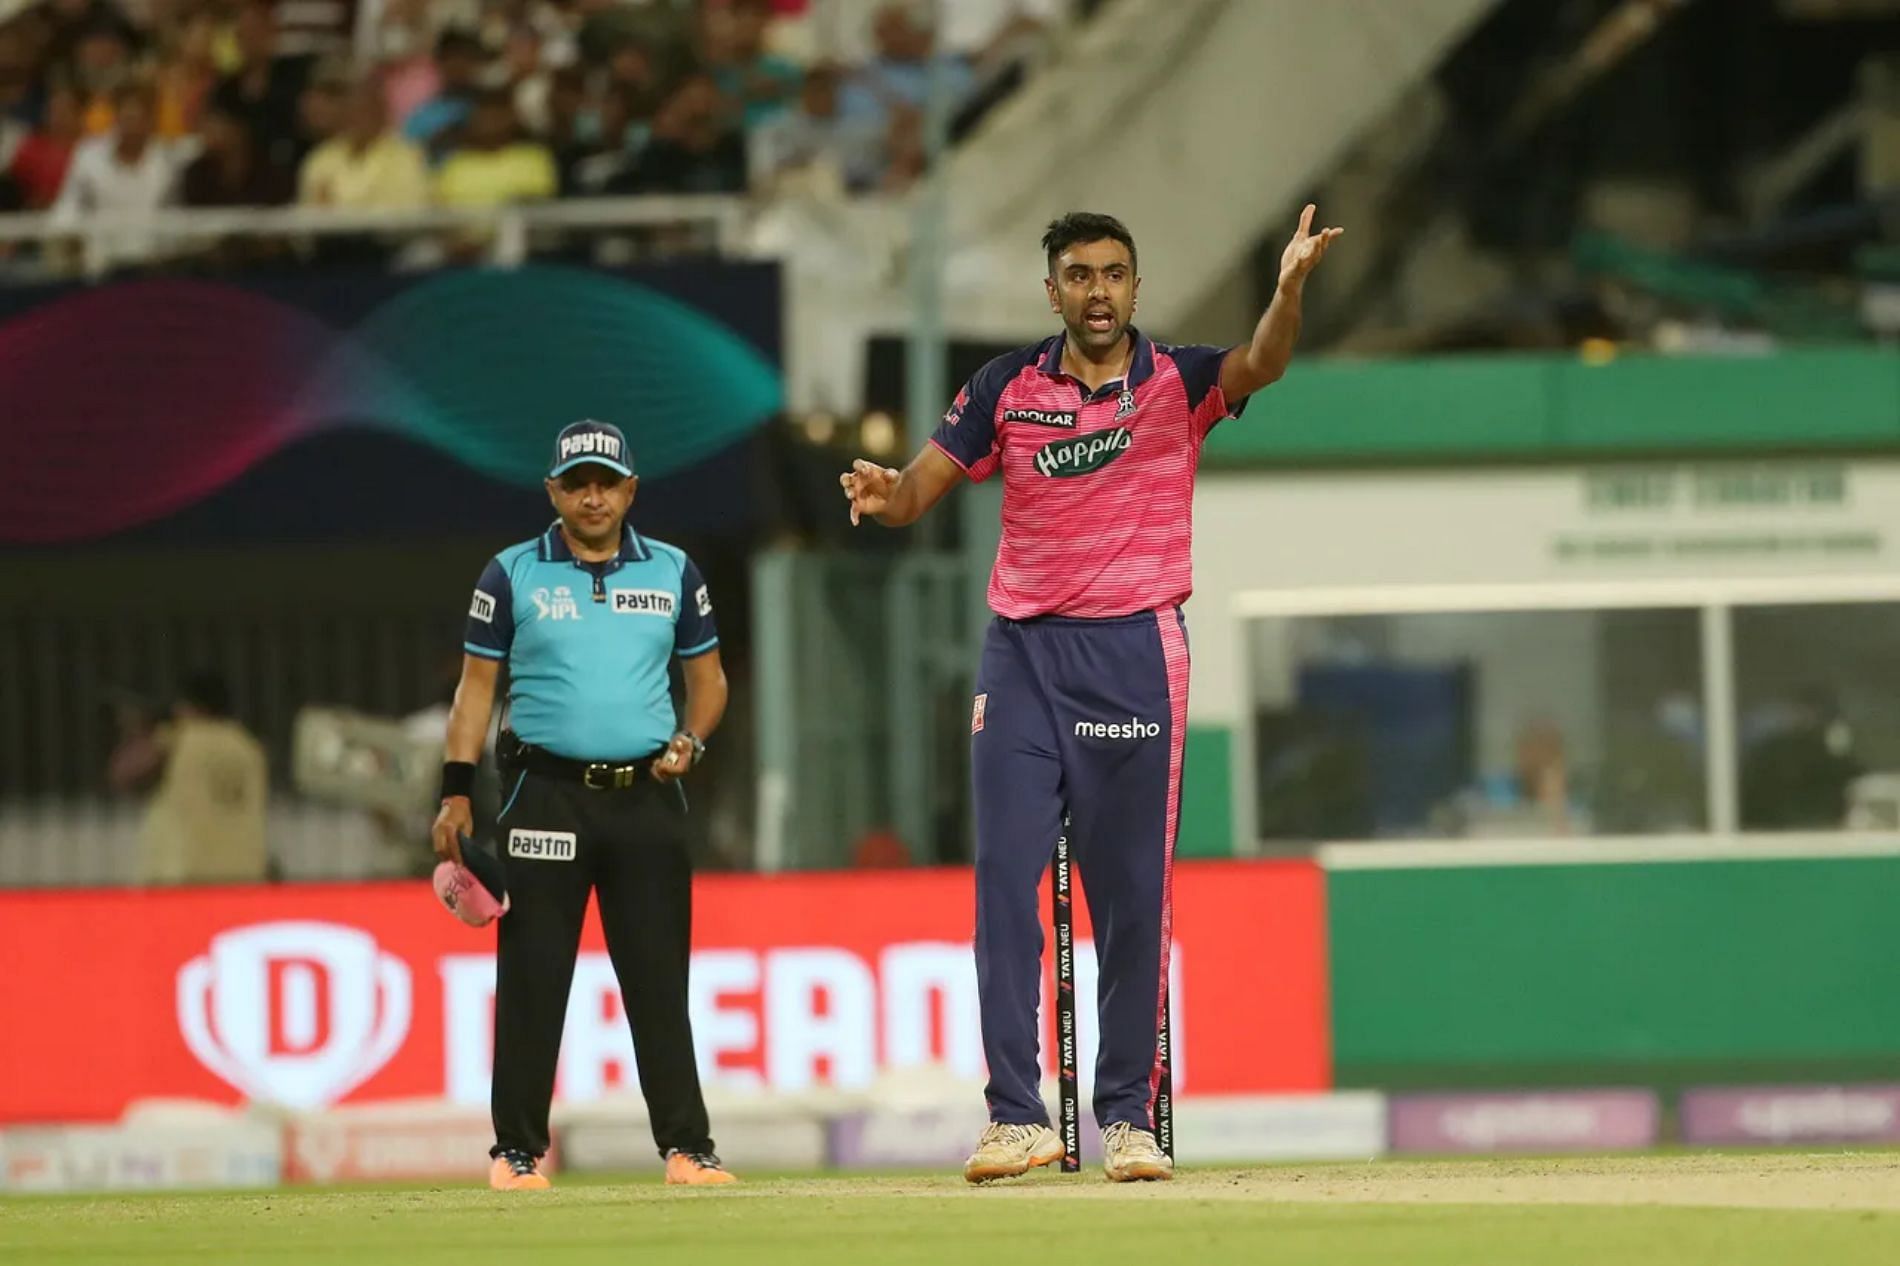 Ravichandran Ashwin will need to be on top of his game